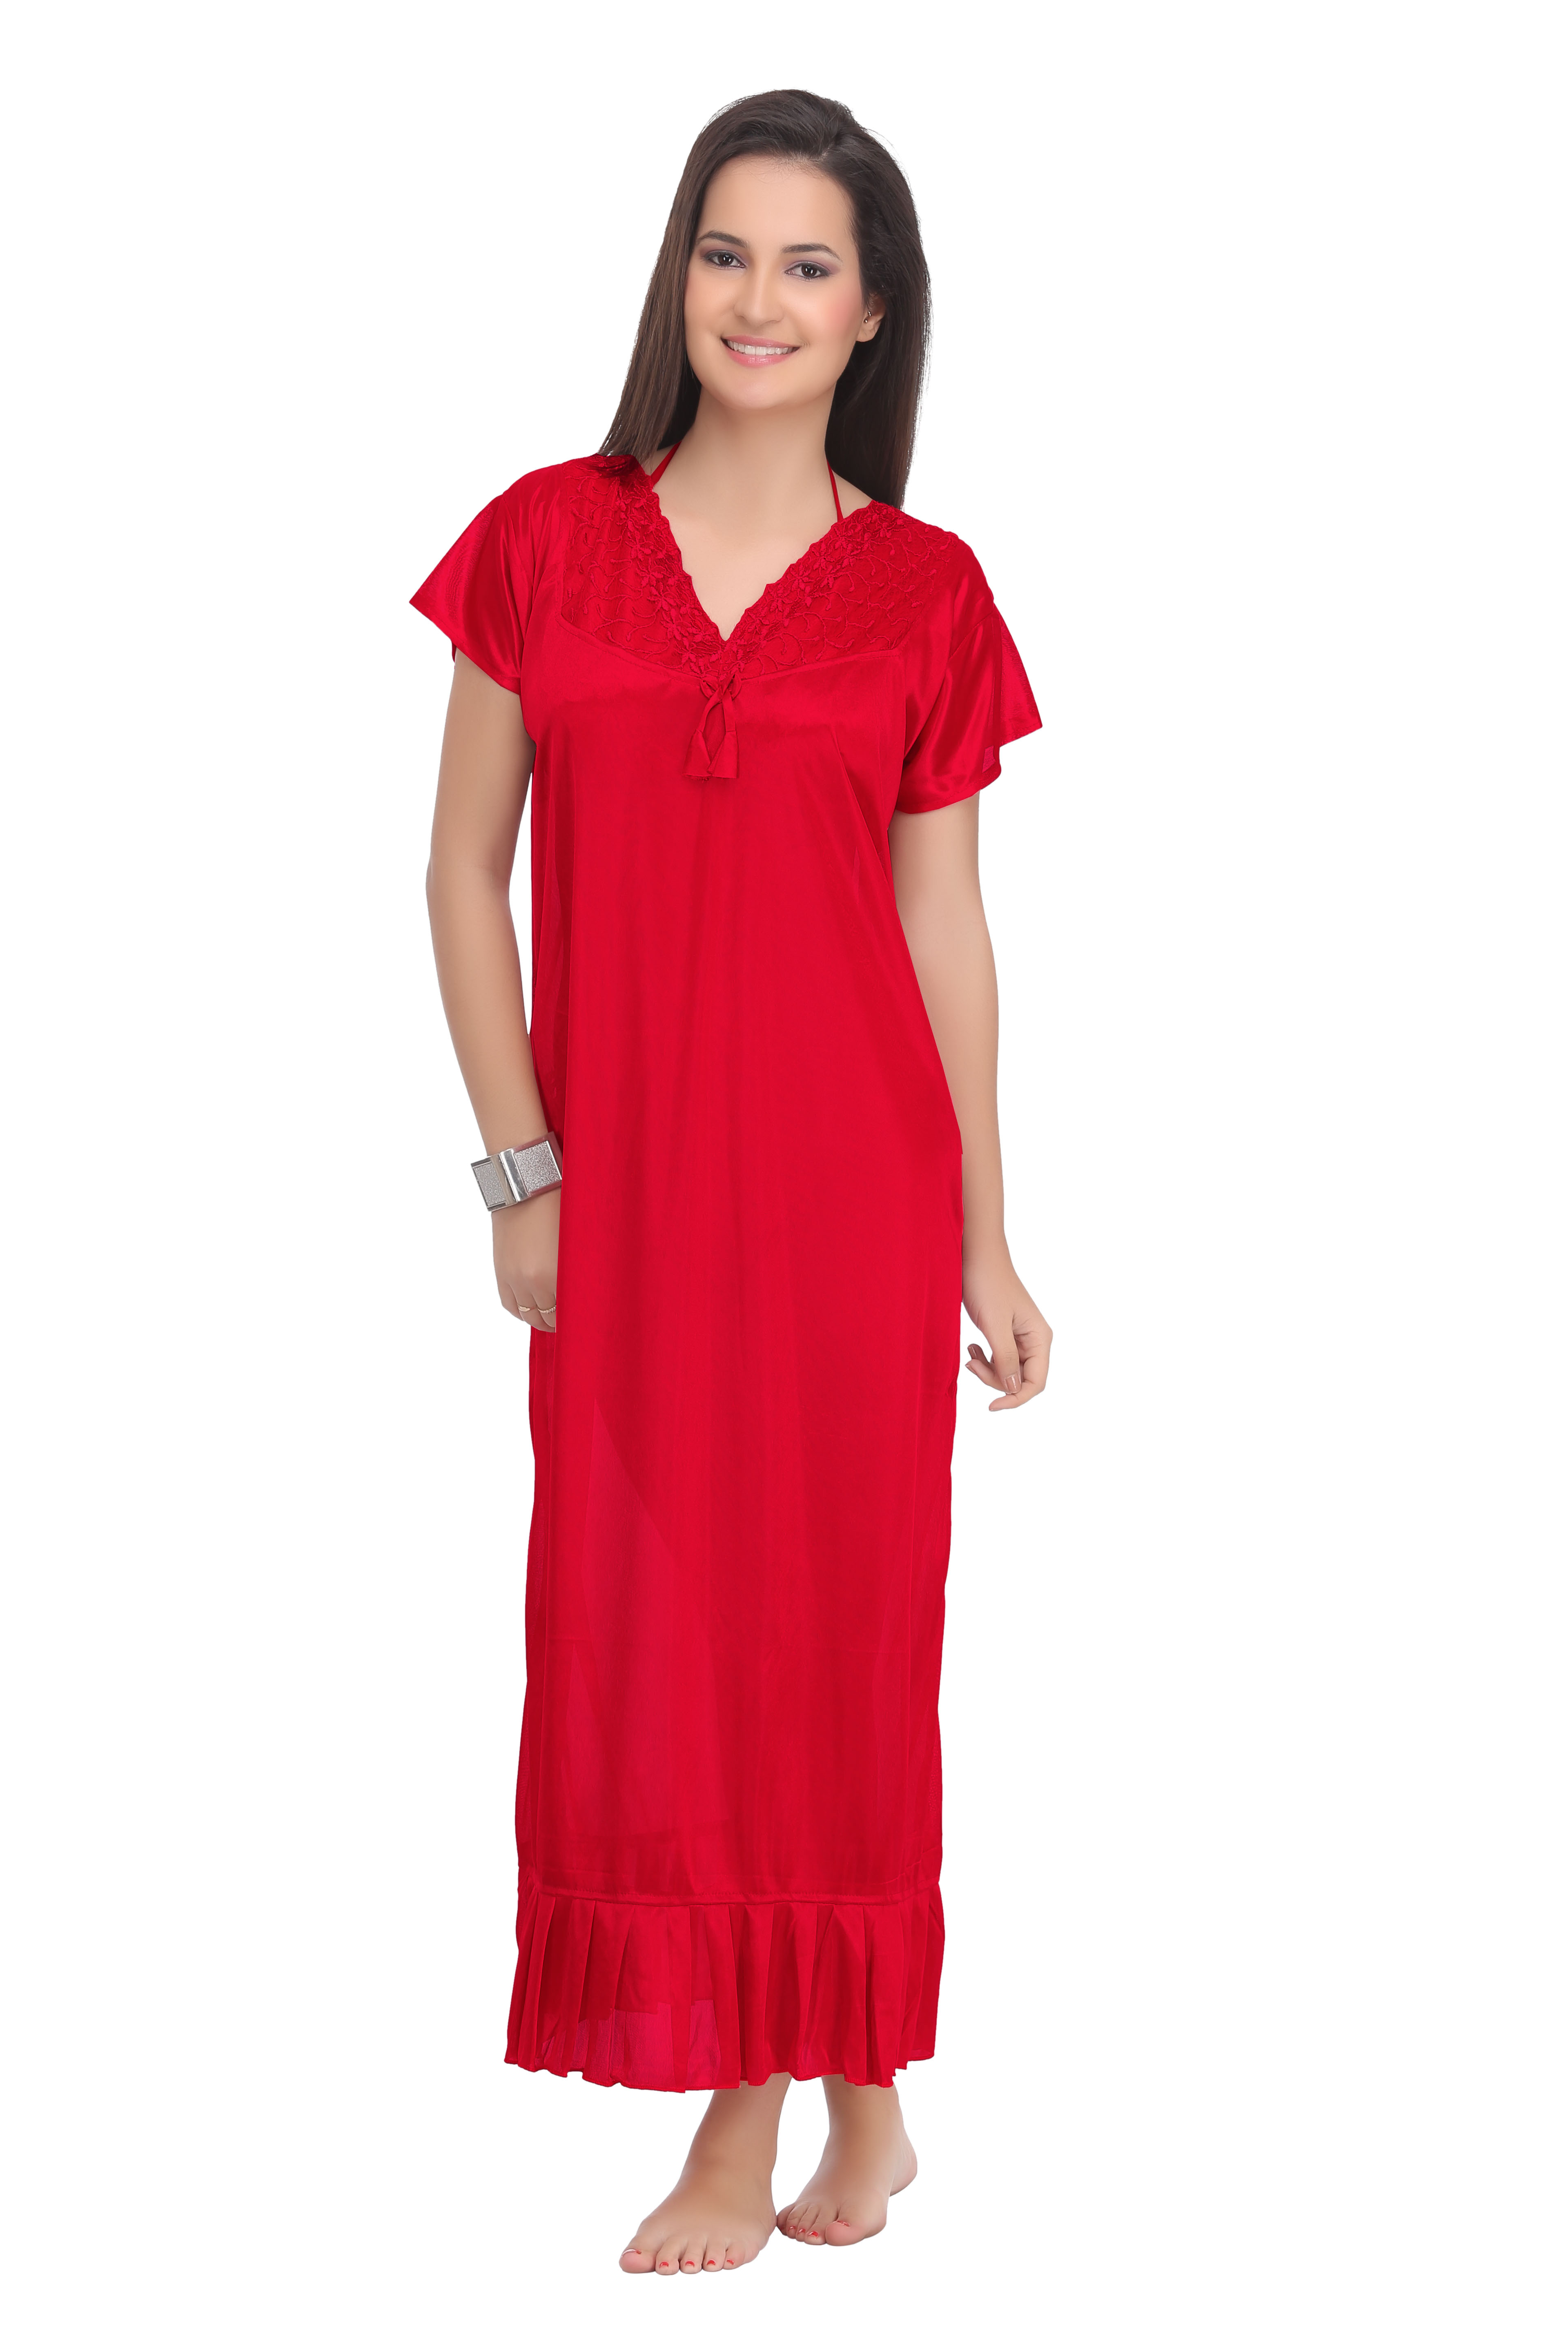 Buy 4 Pc Mahroon Color Night Suits Nighty Gown Night Dressnight Wear Sleep Ware And Robs With